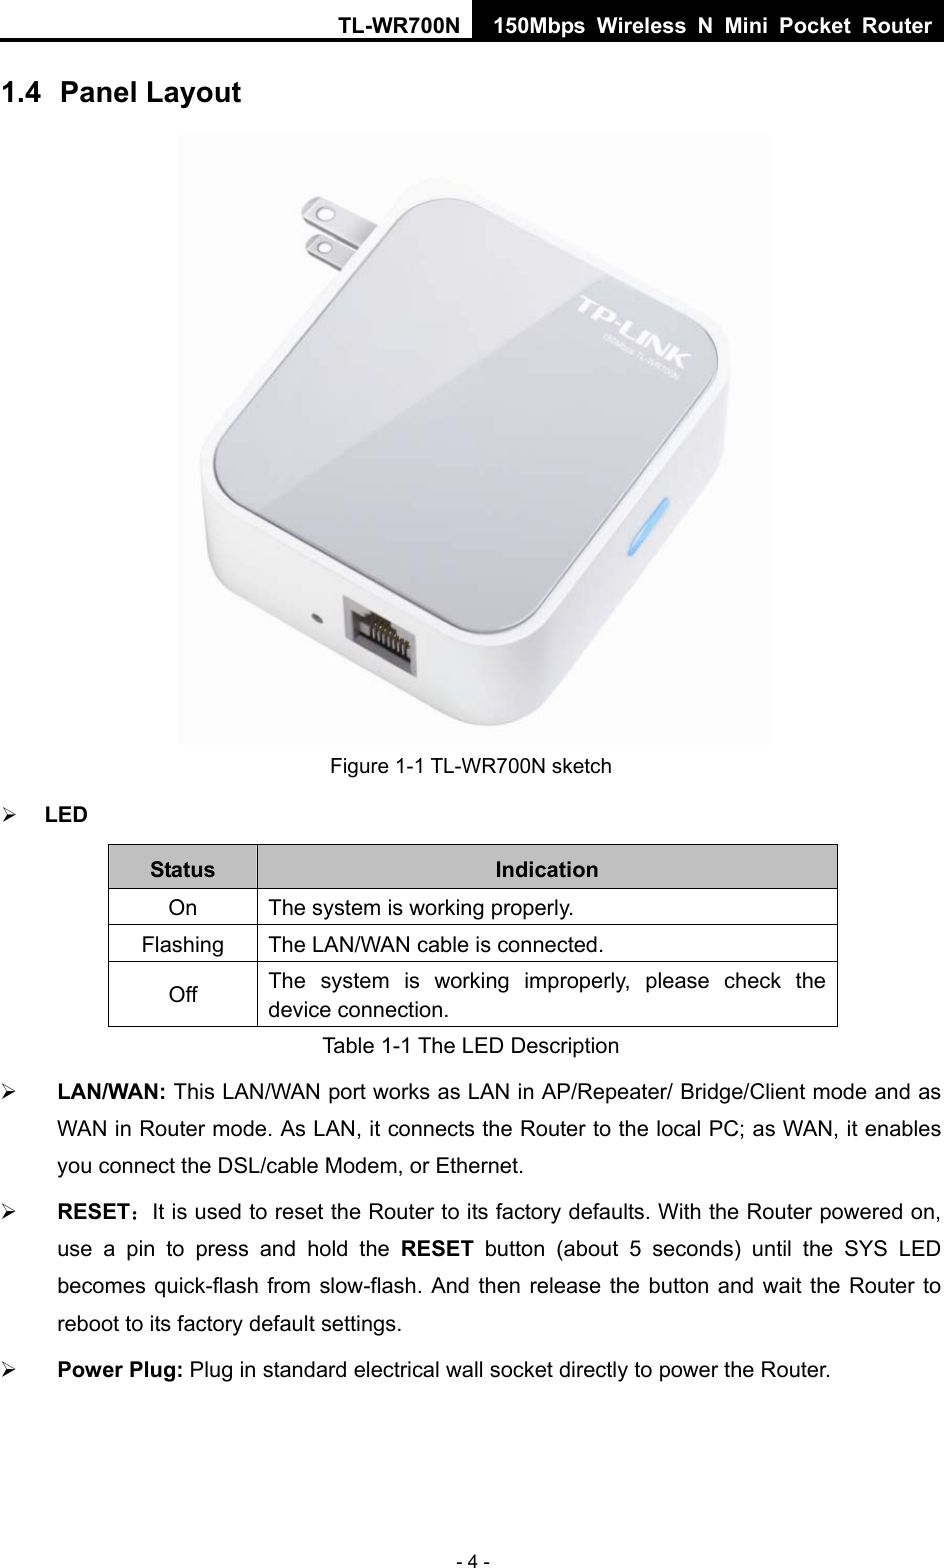 TL-WR700N 150Mbps Wireless N Mini Pocket Router - 4 - 1.4  Panel Layout  Figure 1-1 TL-WR700N sketch ¾ LED Status  Indication On  The system is working properly. Flashing The LAN/WAN cable is connected. Off  The system is working improperly, please check the device connection. Table 1-1 The LED Description ¾ LAN/WAN: This LAN/WAN port works as LAN in AP/Repeater/ Bridge/Client mode and as WAN in Router mode. As LAN, it connects the Router to the local PC; as WAN, it enables you connect the DSL/cable Modem, or Ethernet. ¾ RESET：It is used to reset the Router to its factory defaults. With the Router powered on, use a pin to press and hold the RESET button (about 5 seconds) until the SYS LED becomes quick-flash from slow-flash. And then release the button and wait the Router to reboot to its factory default settings. ¾ Power Plug: Plug in standard electrical wall socket directly to power the Router. 